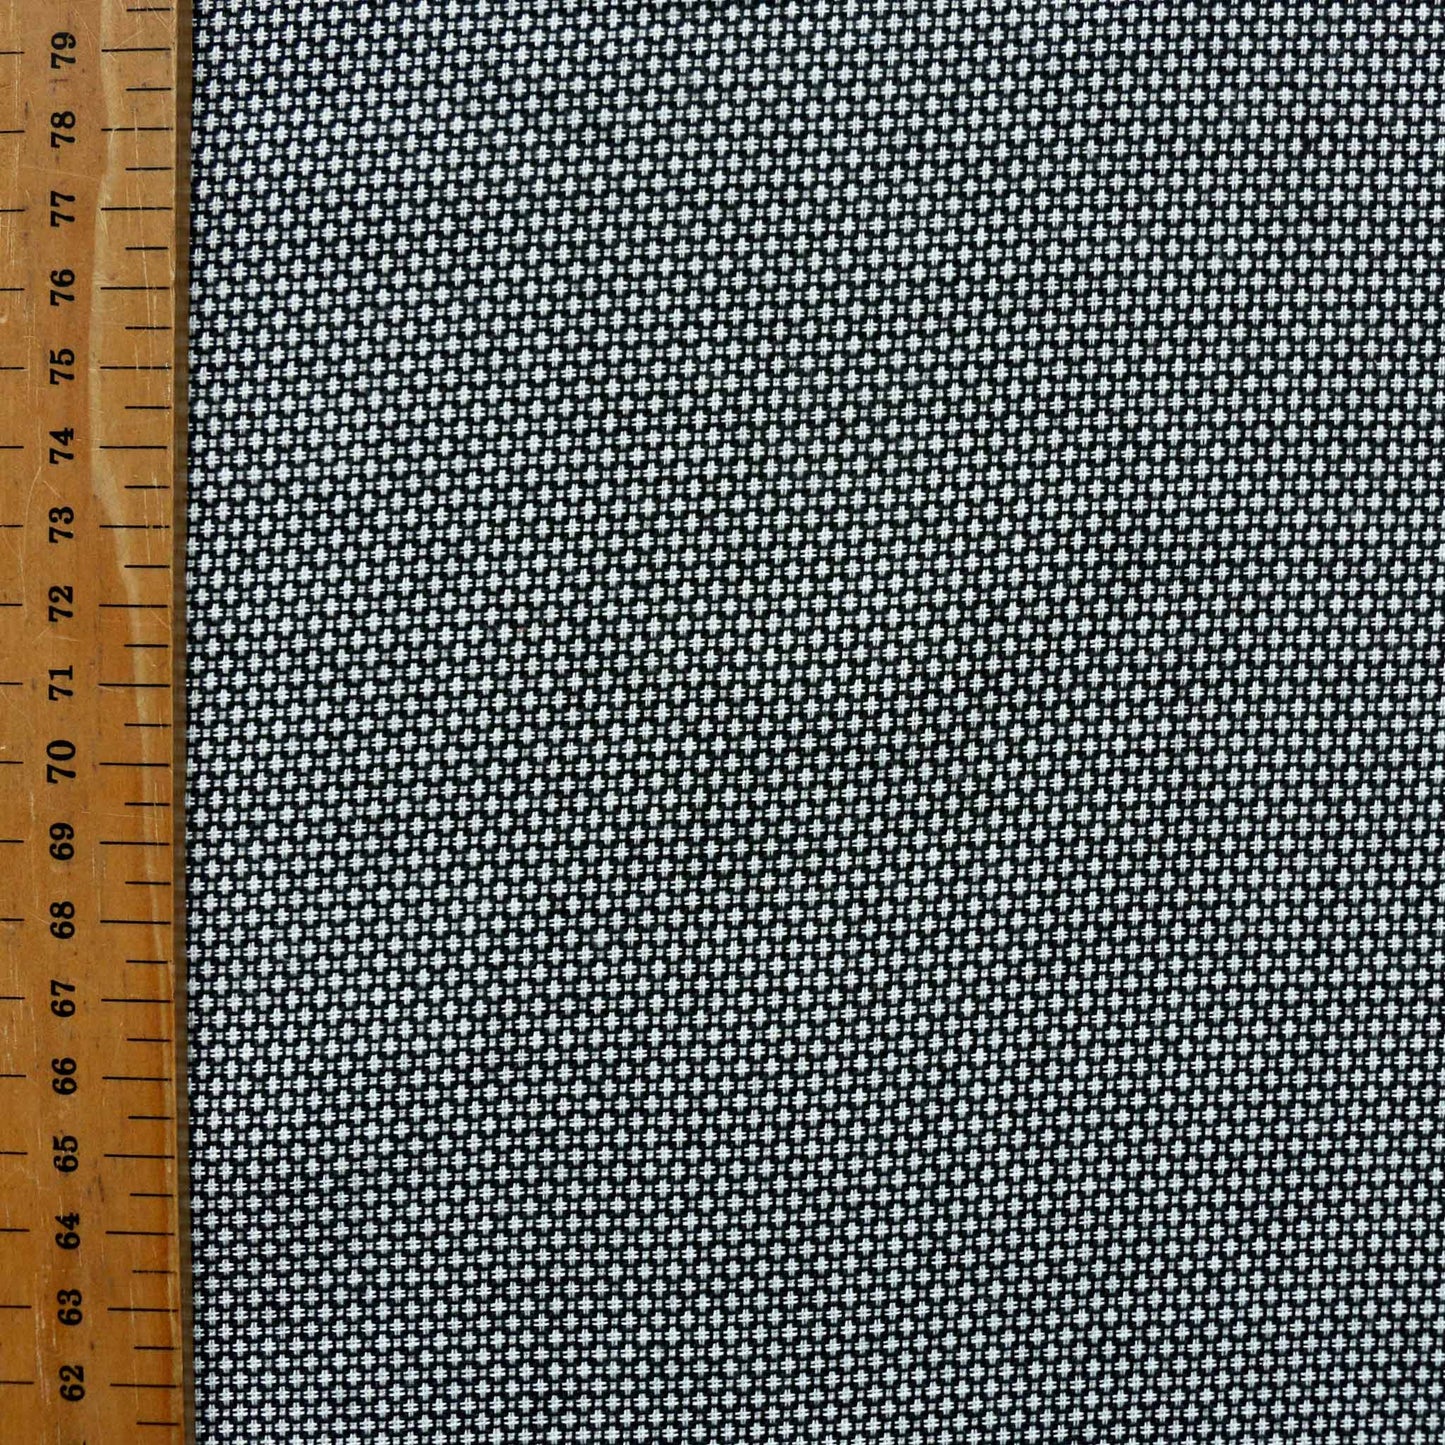 metre black polyviscose suiting fabric for dressmaking with white jacquard dot design